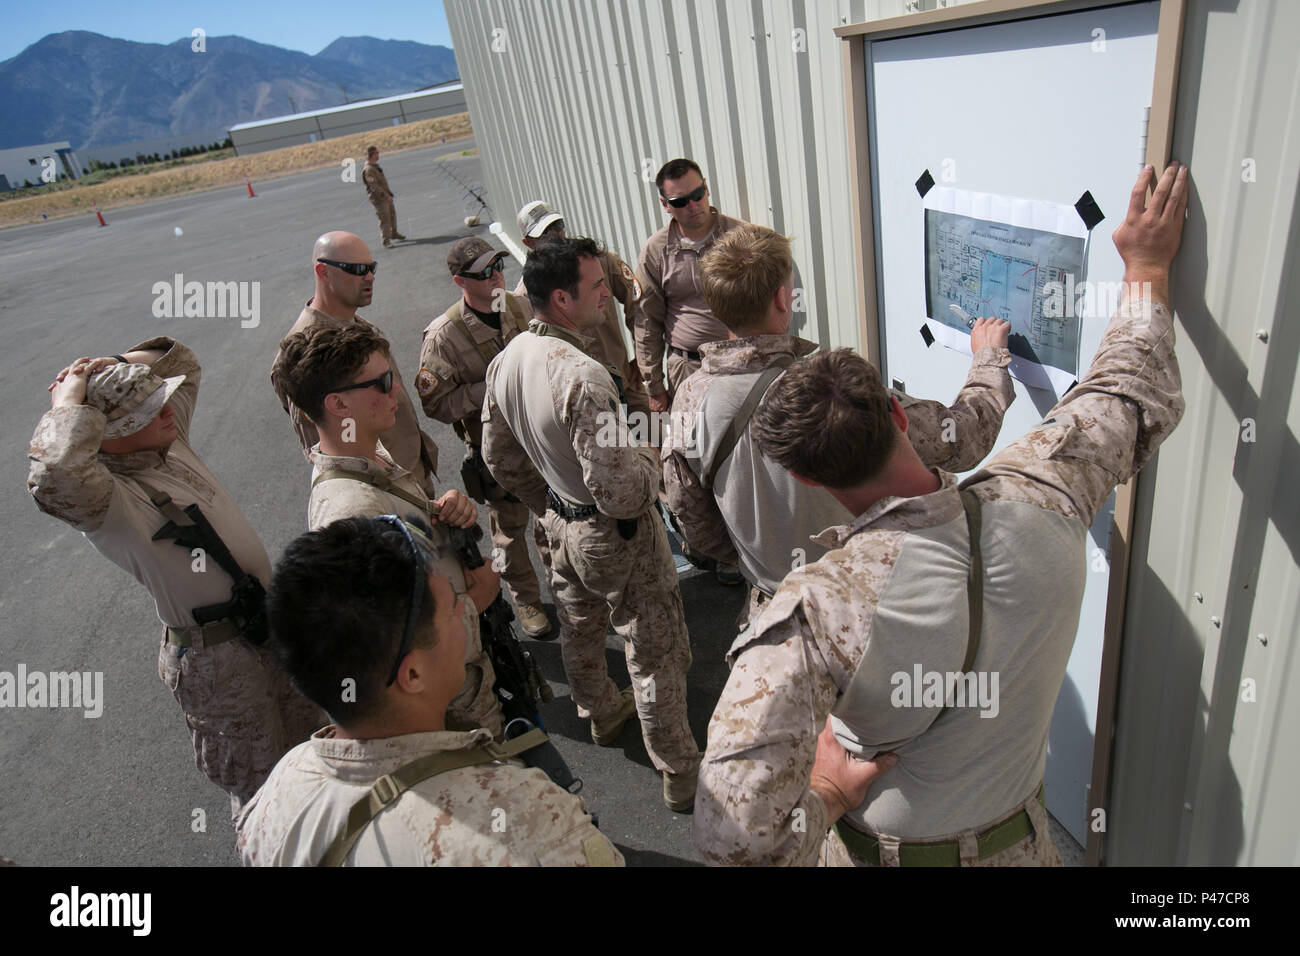 Marines and policemen review a map of their area of operations for a simulated urban raid during the 11th Marine Expeditionary Unit’s Realistic Urban Training near Minden, NV, June 18, 2016. RUT helps prepare the 11th MEU Marines for their upcoming deployment, enhancing Marines' combat skills in a simulated urban environment similar to those they may find during combat missions. The Marines are with the Maritime Raid Force, 11th MEU, and the policemen are with the Reno Police Department Special Weapons and Tactics team (U.S. Marine Corps photo by Sgt. Xzavior T. McNeal/Released) Stock Photo